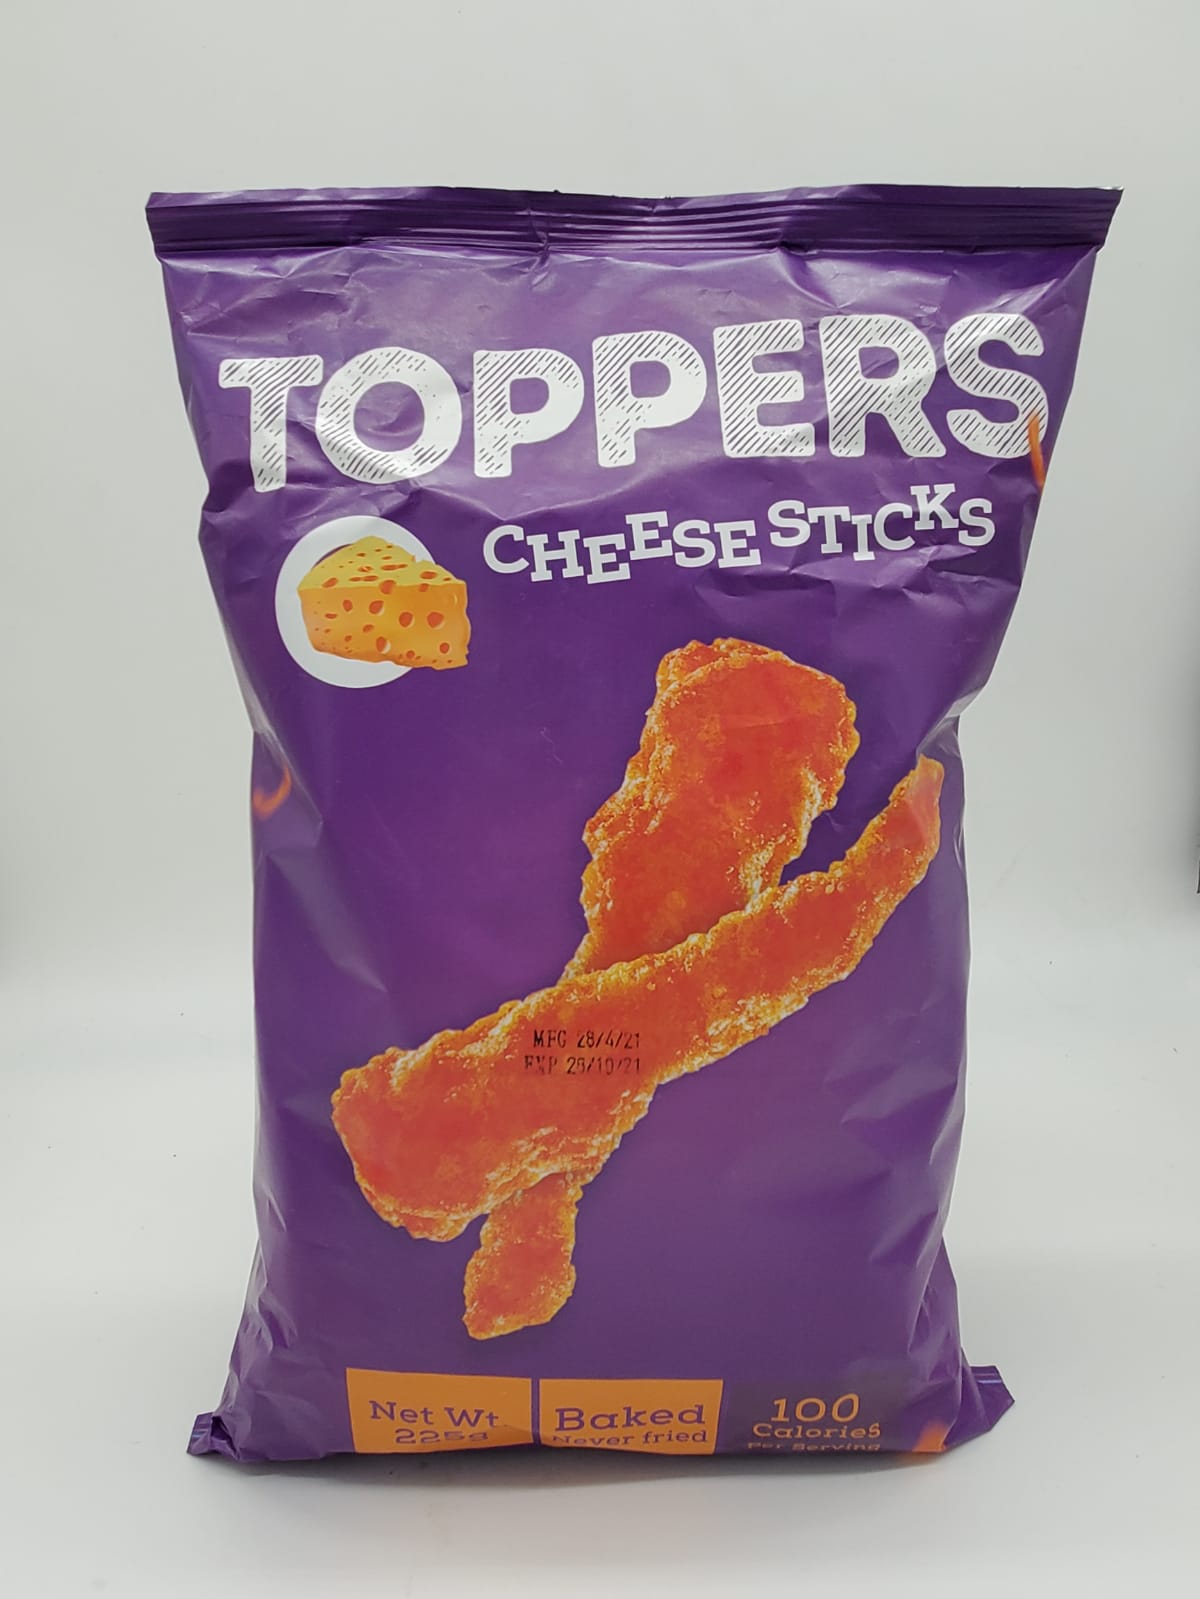 TOPPERS CHEESE STICKS 225G